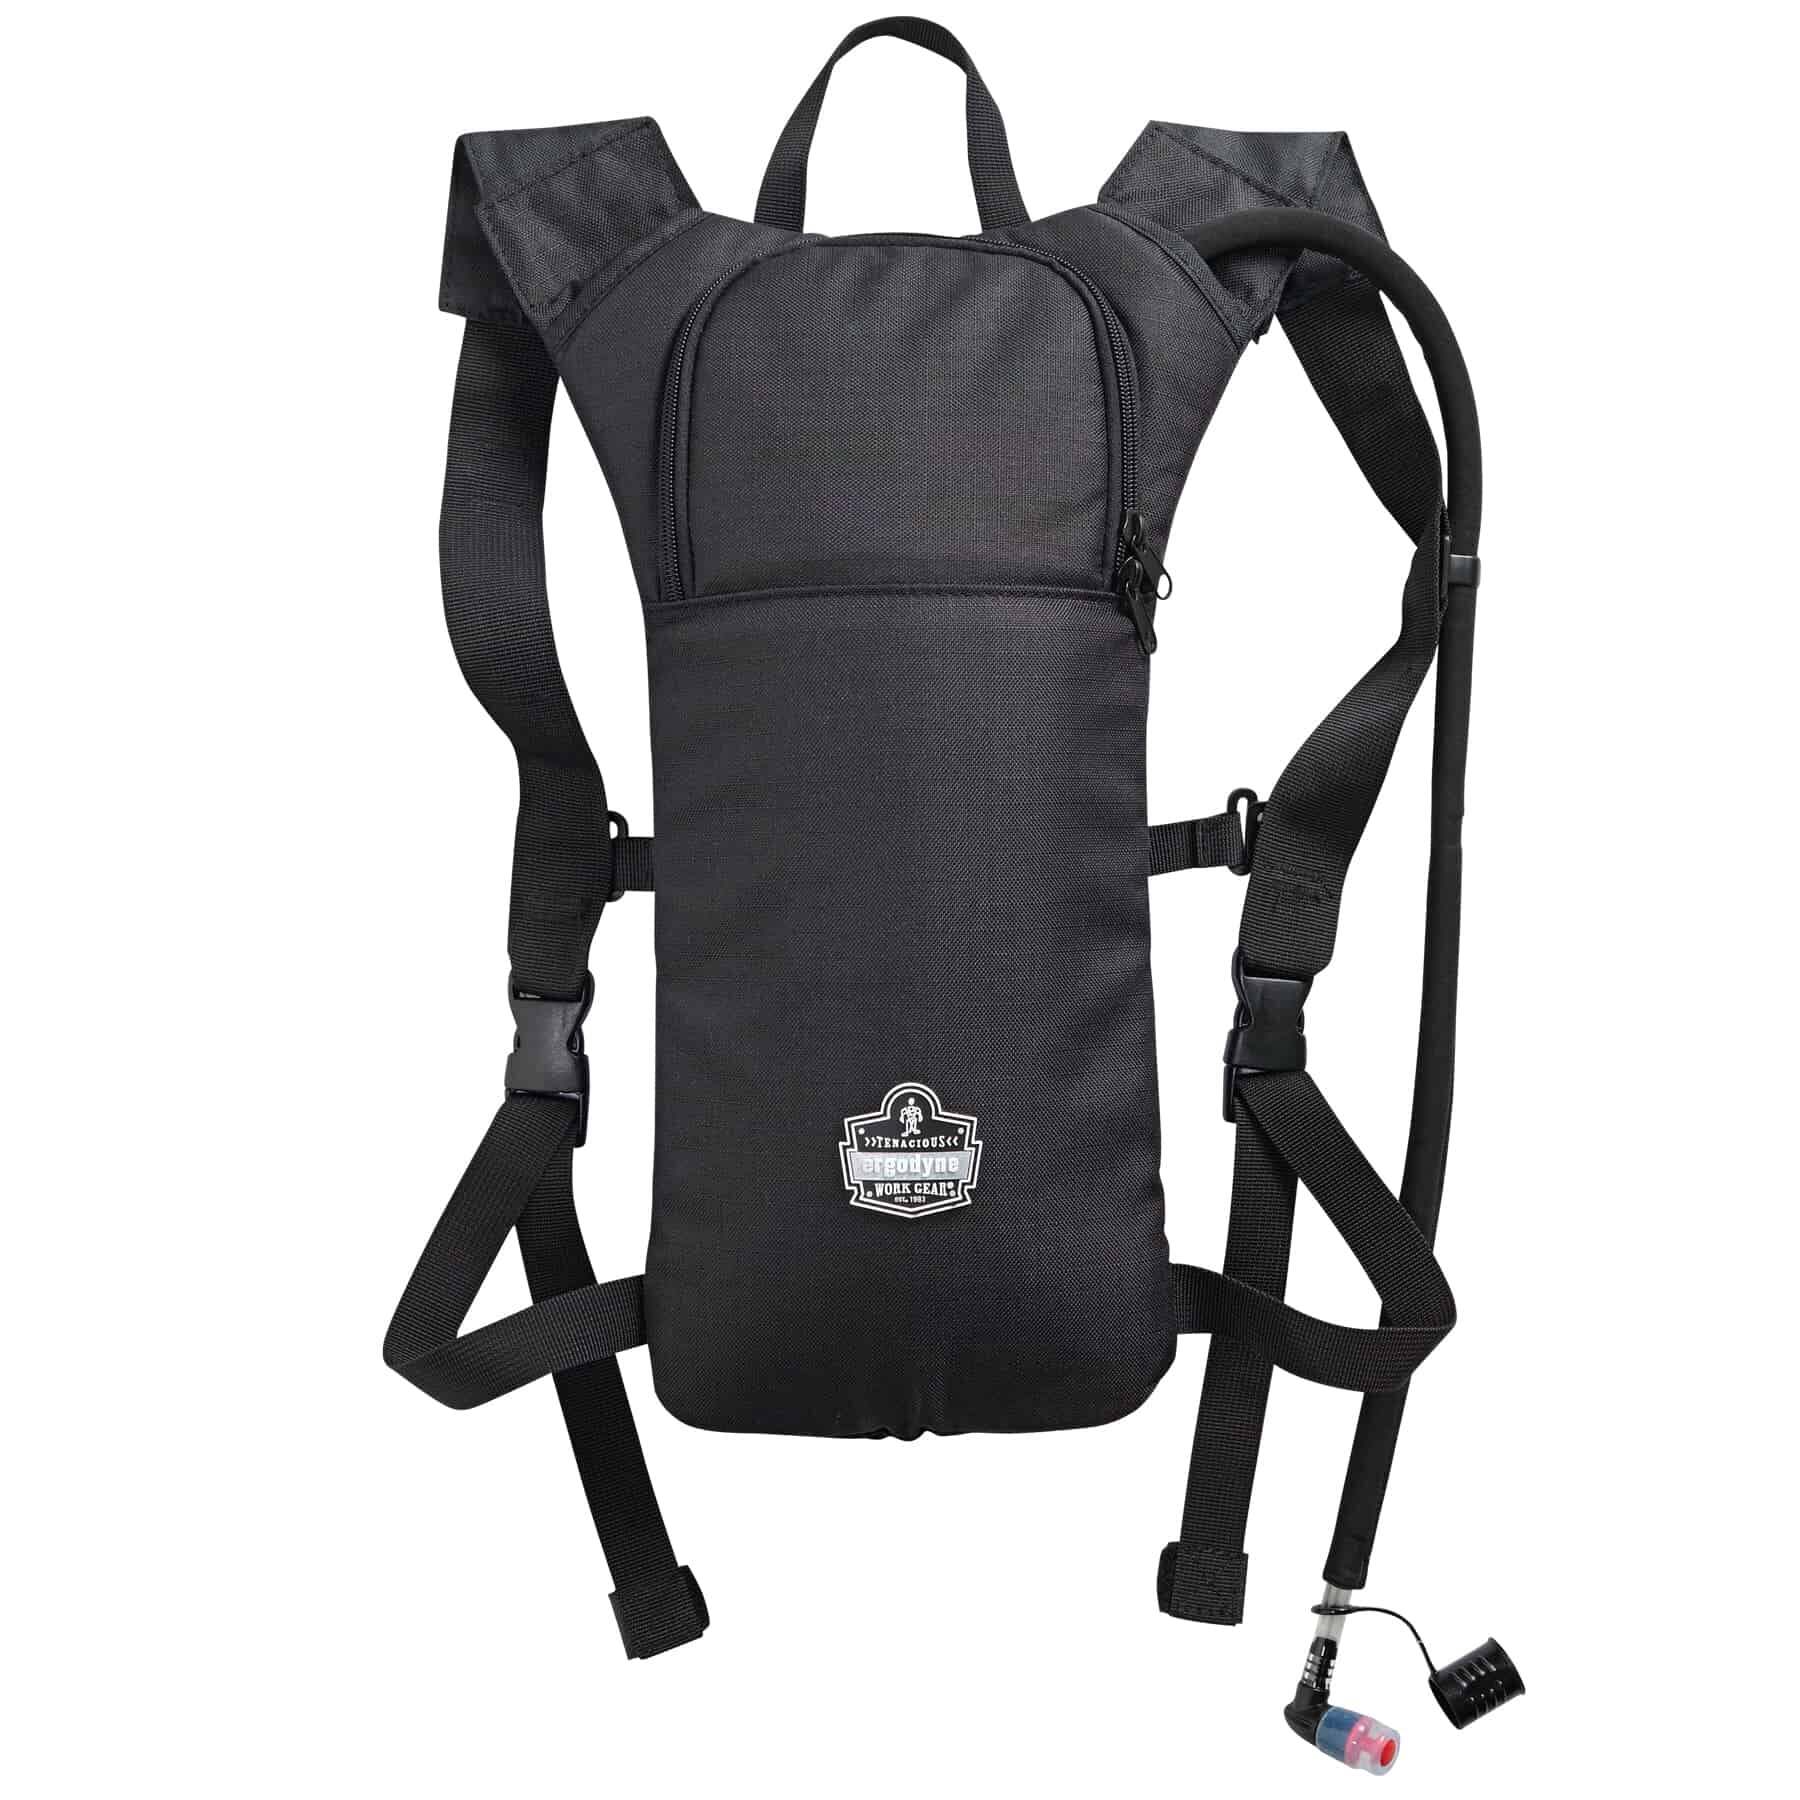 Ergodyne 5155 Chill-Its Low Profile Hydration Pack from Columbia Safety